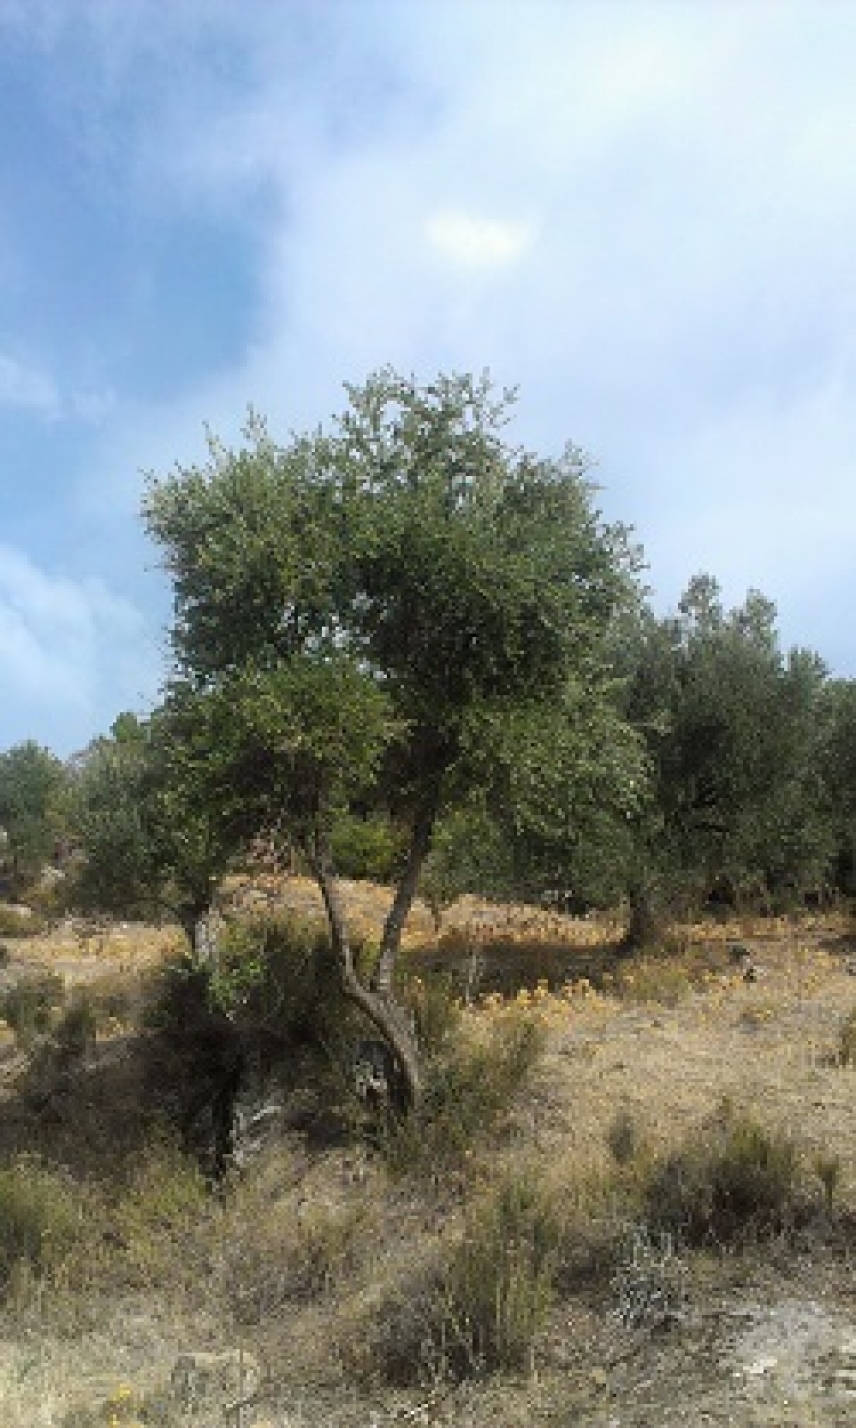 The wild olive genome accounts for high oleic acid concentrations in olives